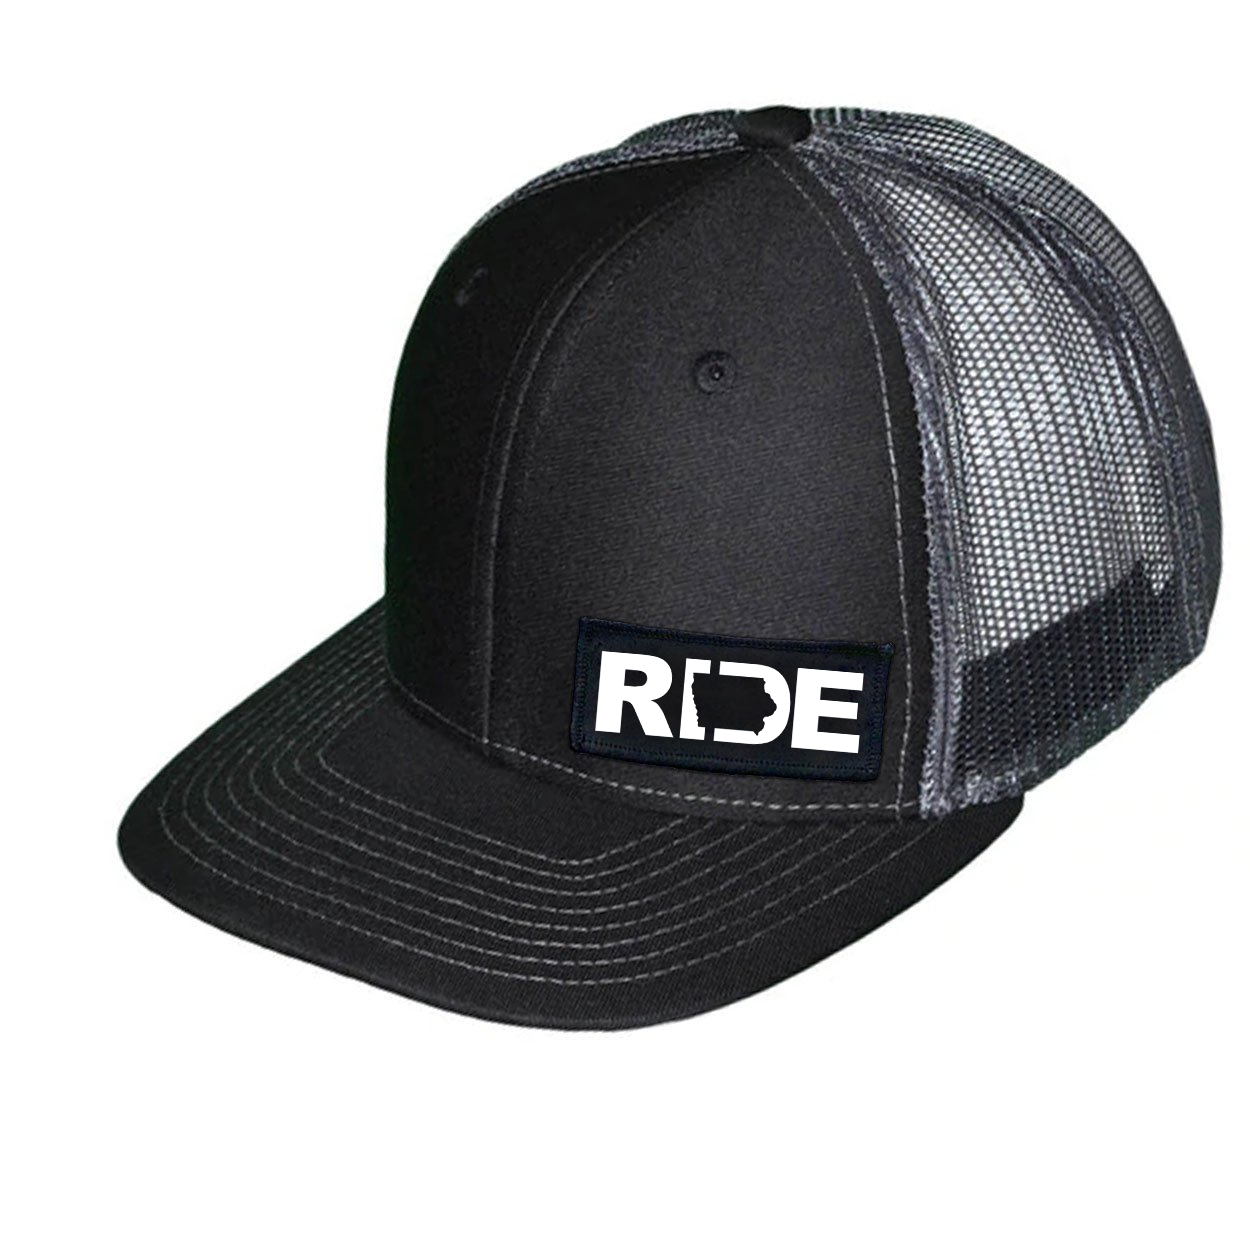 Ride Iowa Classic Pro Night Out Embroidered Snapback Trucker Hat Black/Gray